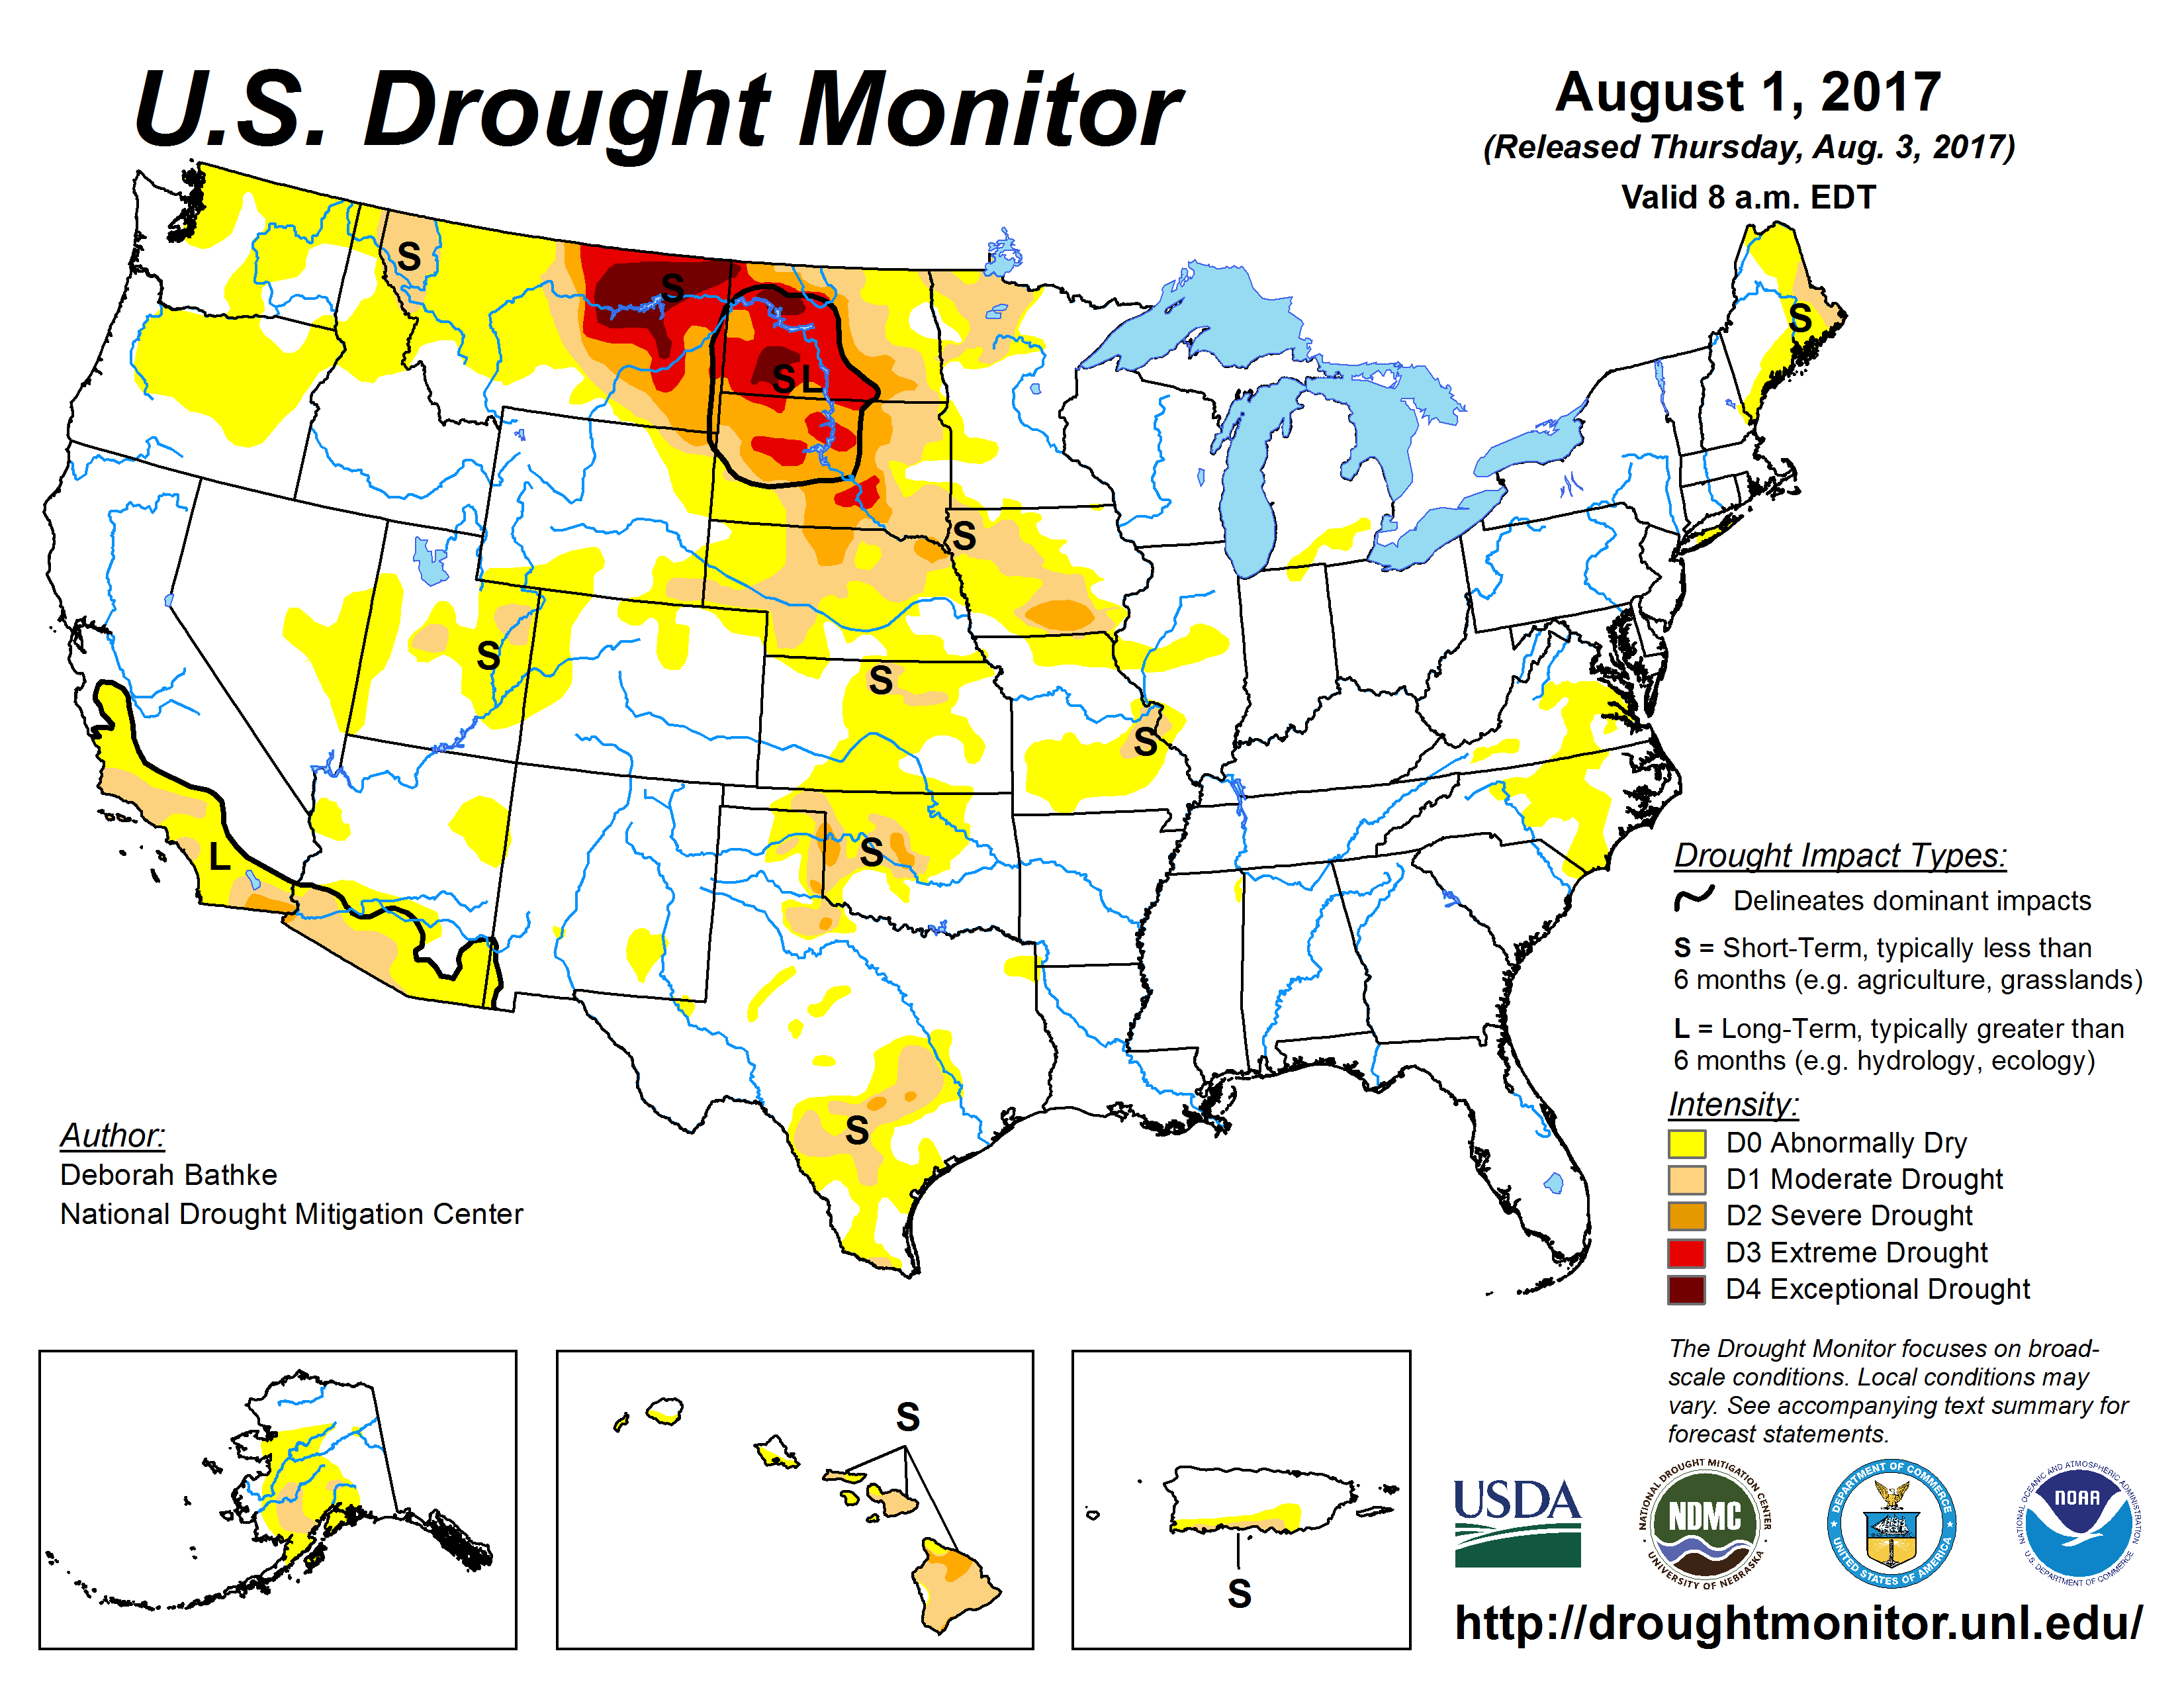 The U.S. Drought Monitor drought map valid August 1, 2017